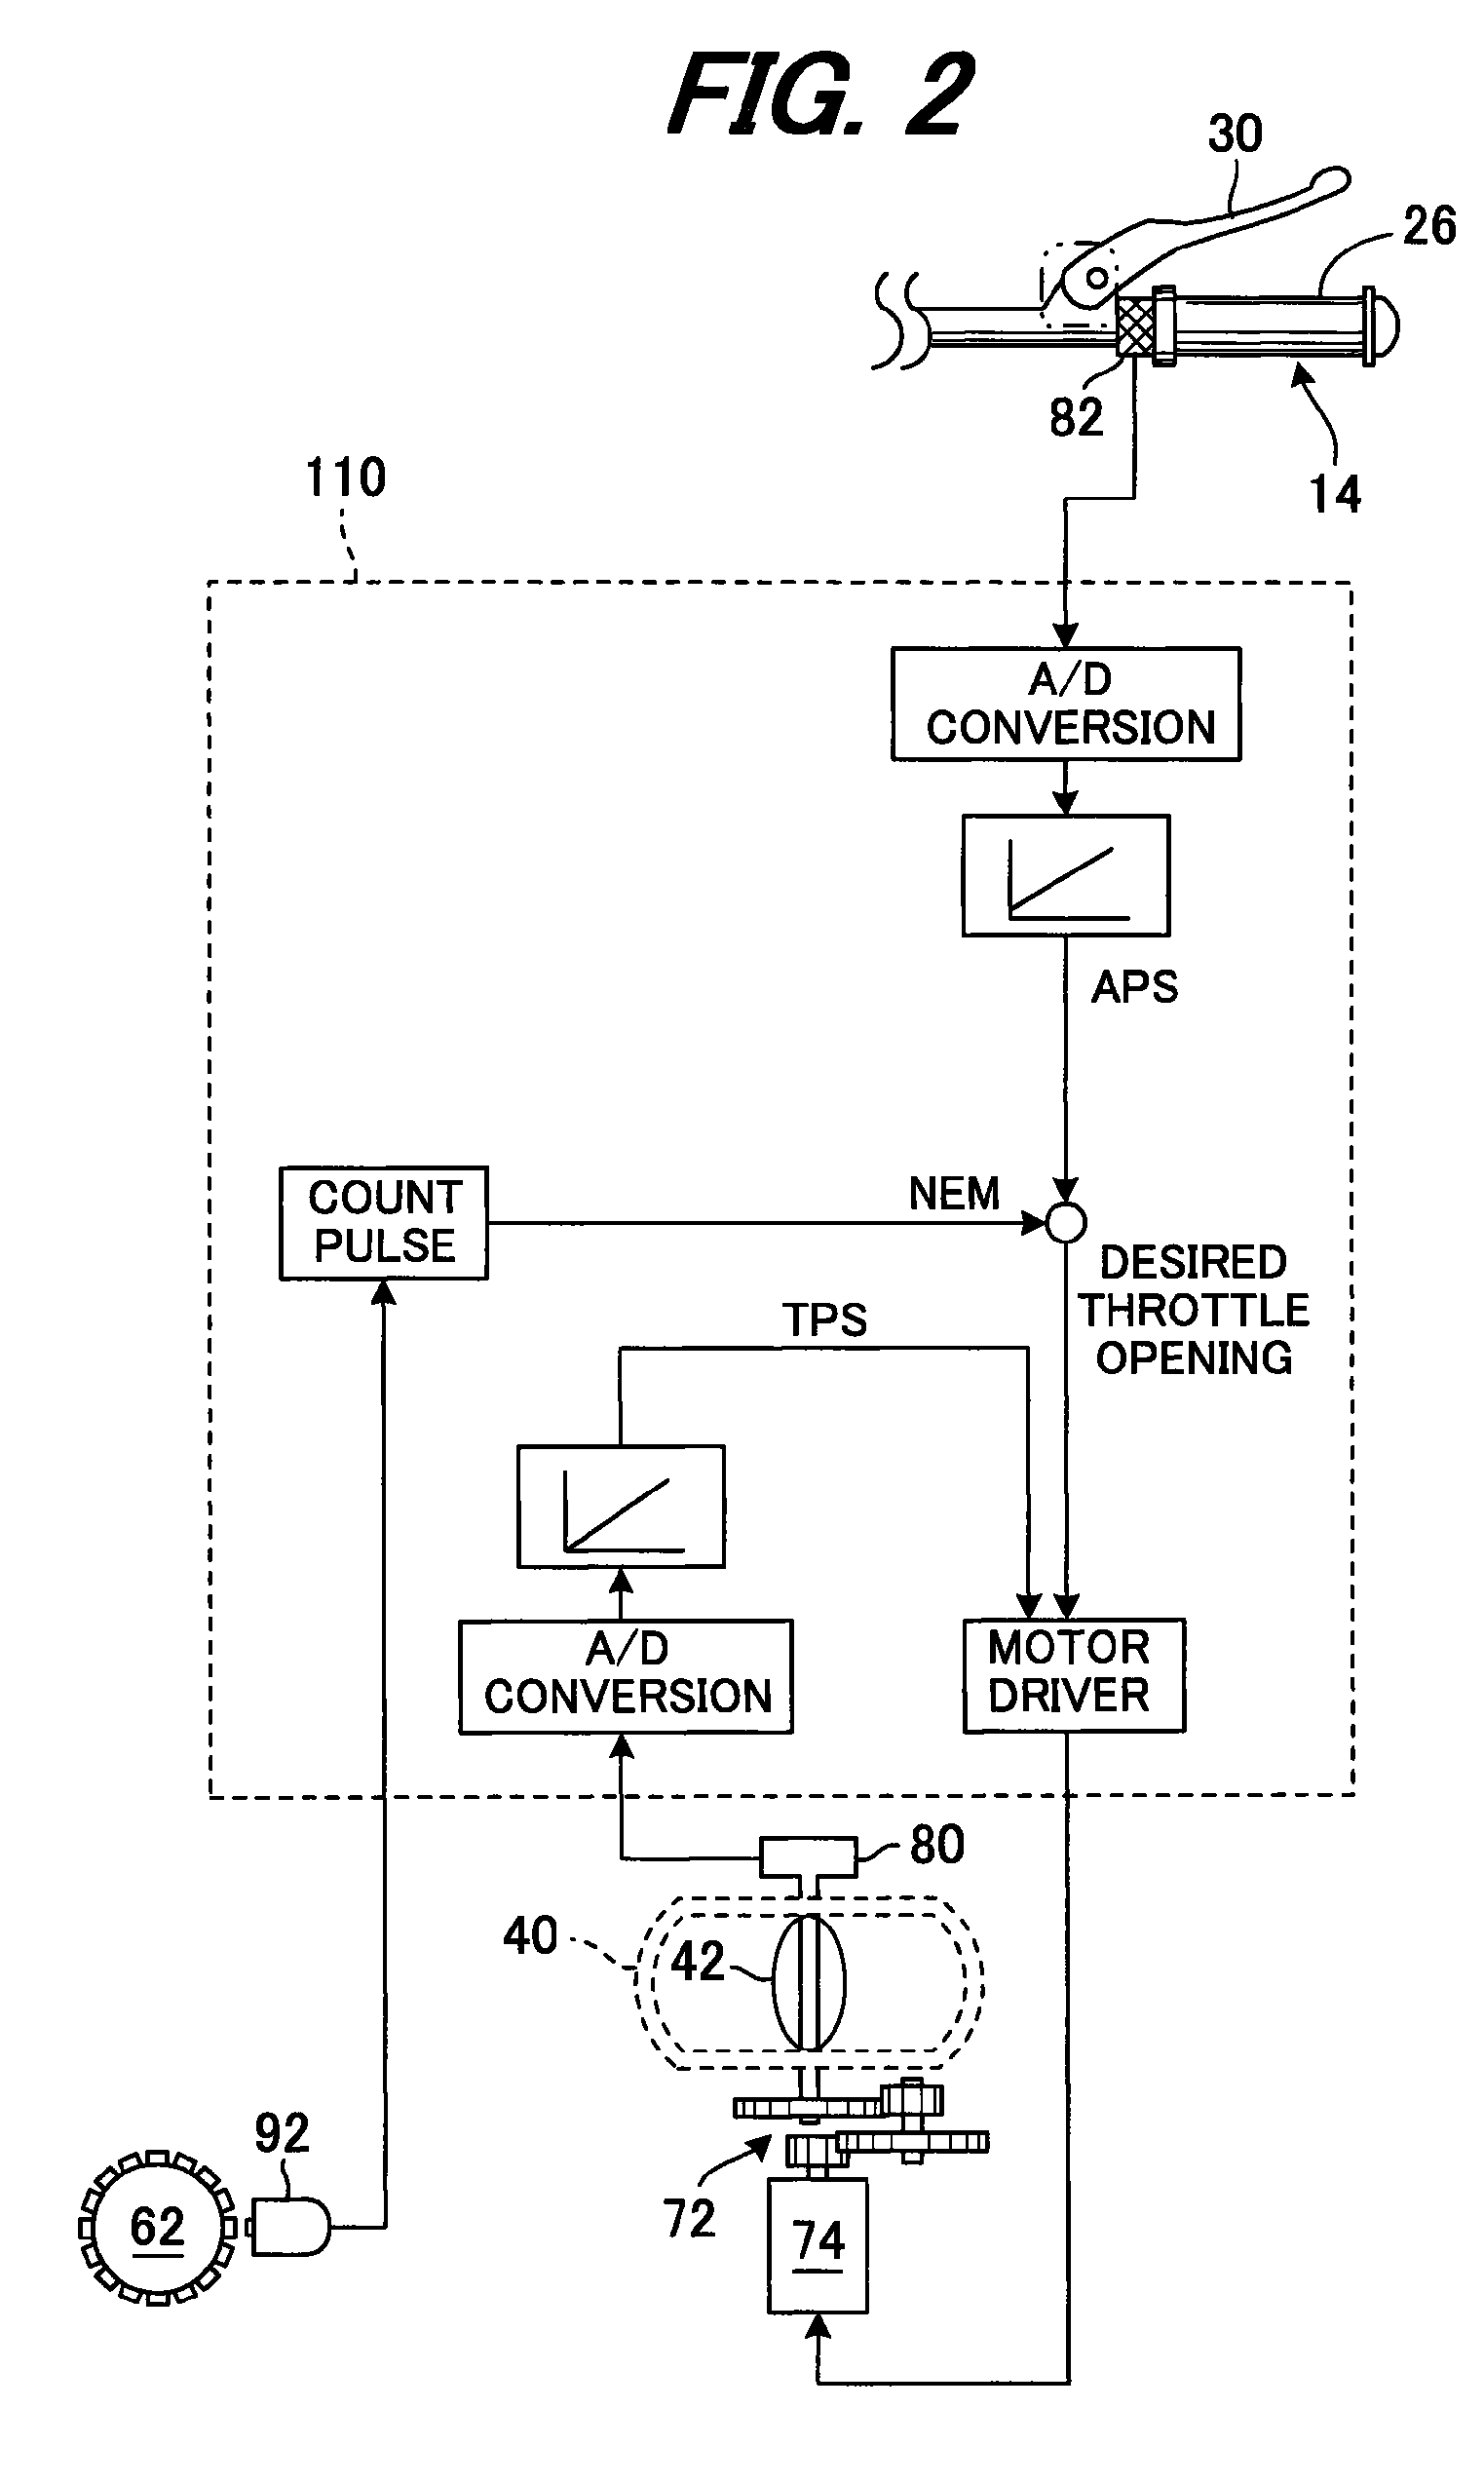 Cruise controller for saddle-seat vehicle